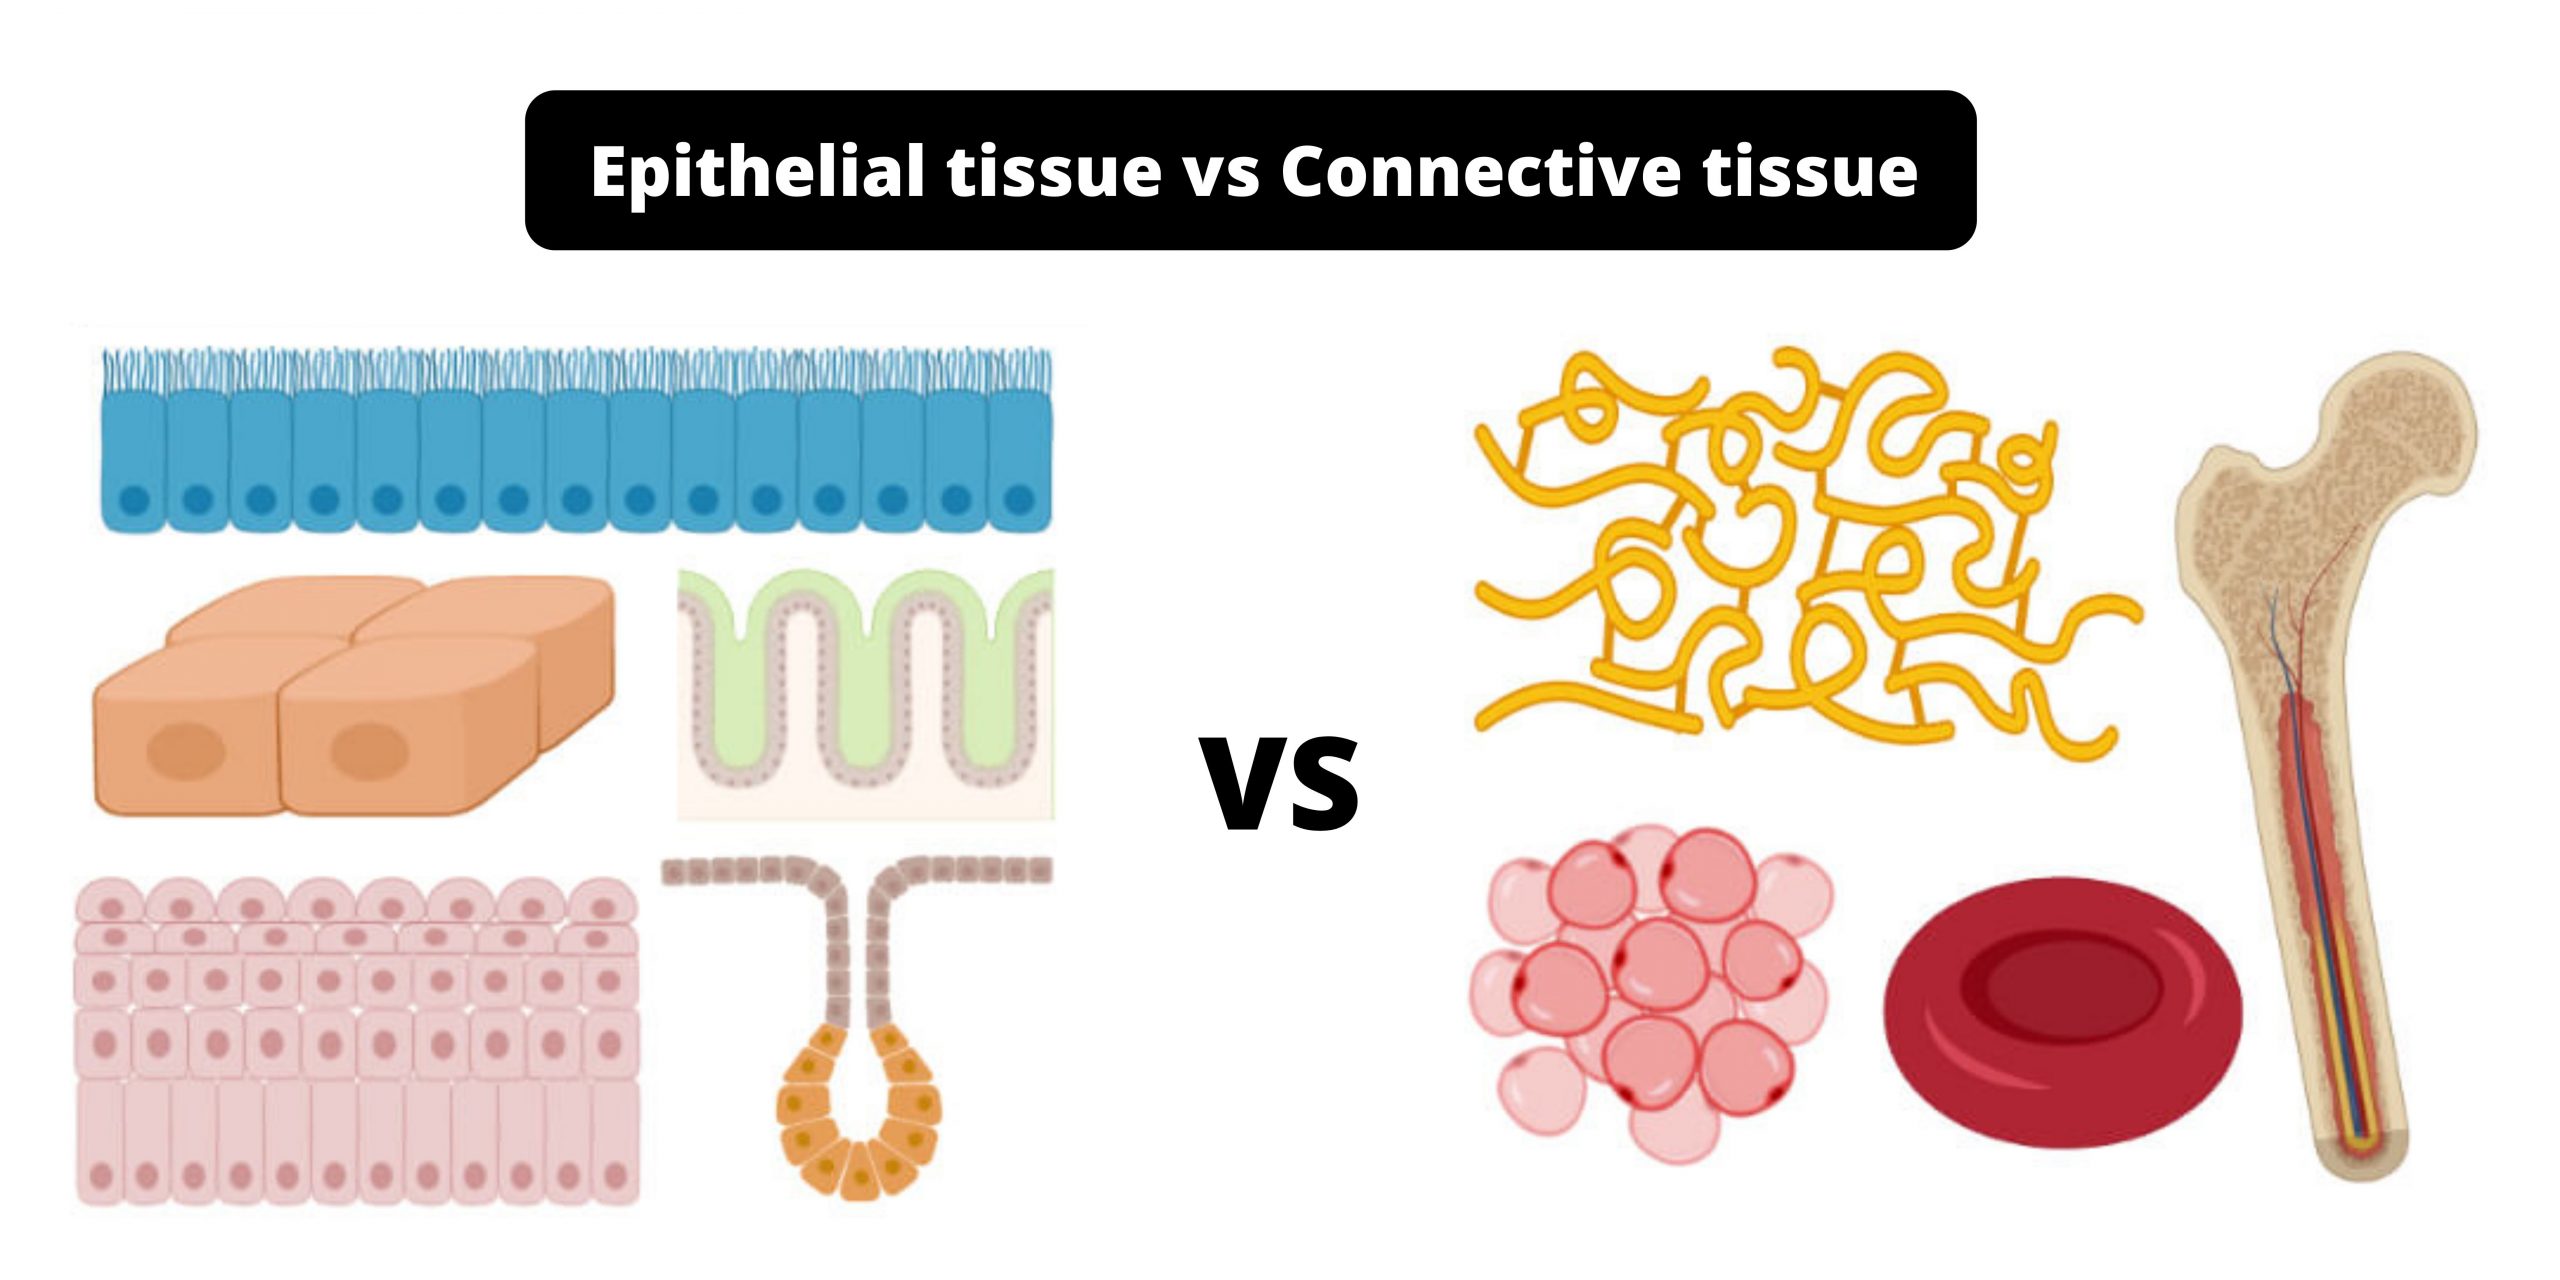 Difference between Epithelial tissue and Connective tissue - Epithelial tissue vs Connective tissue